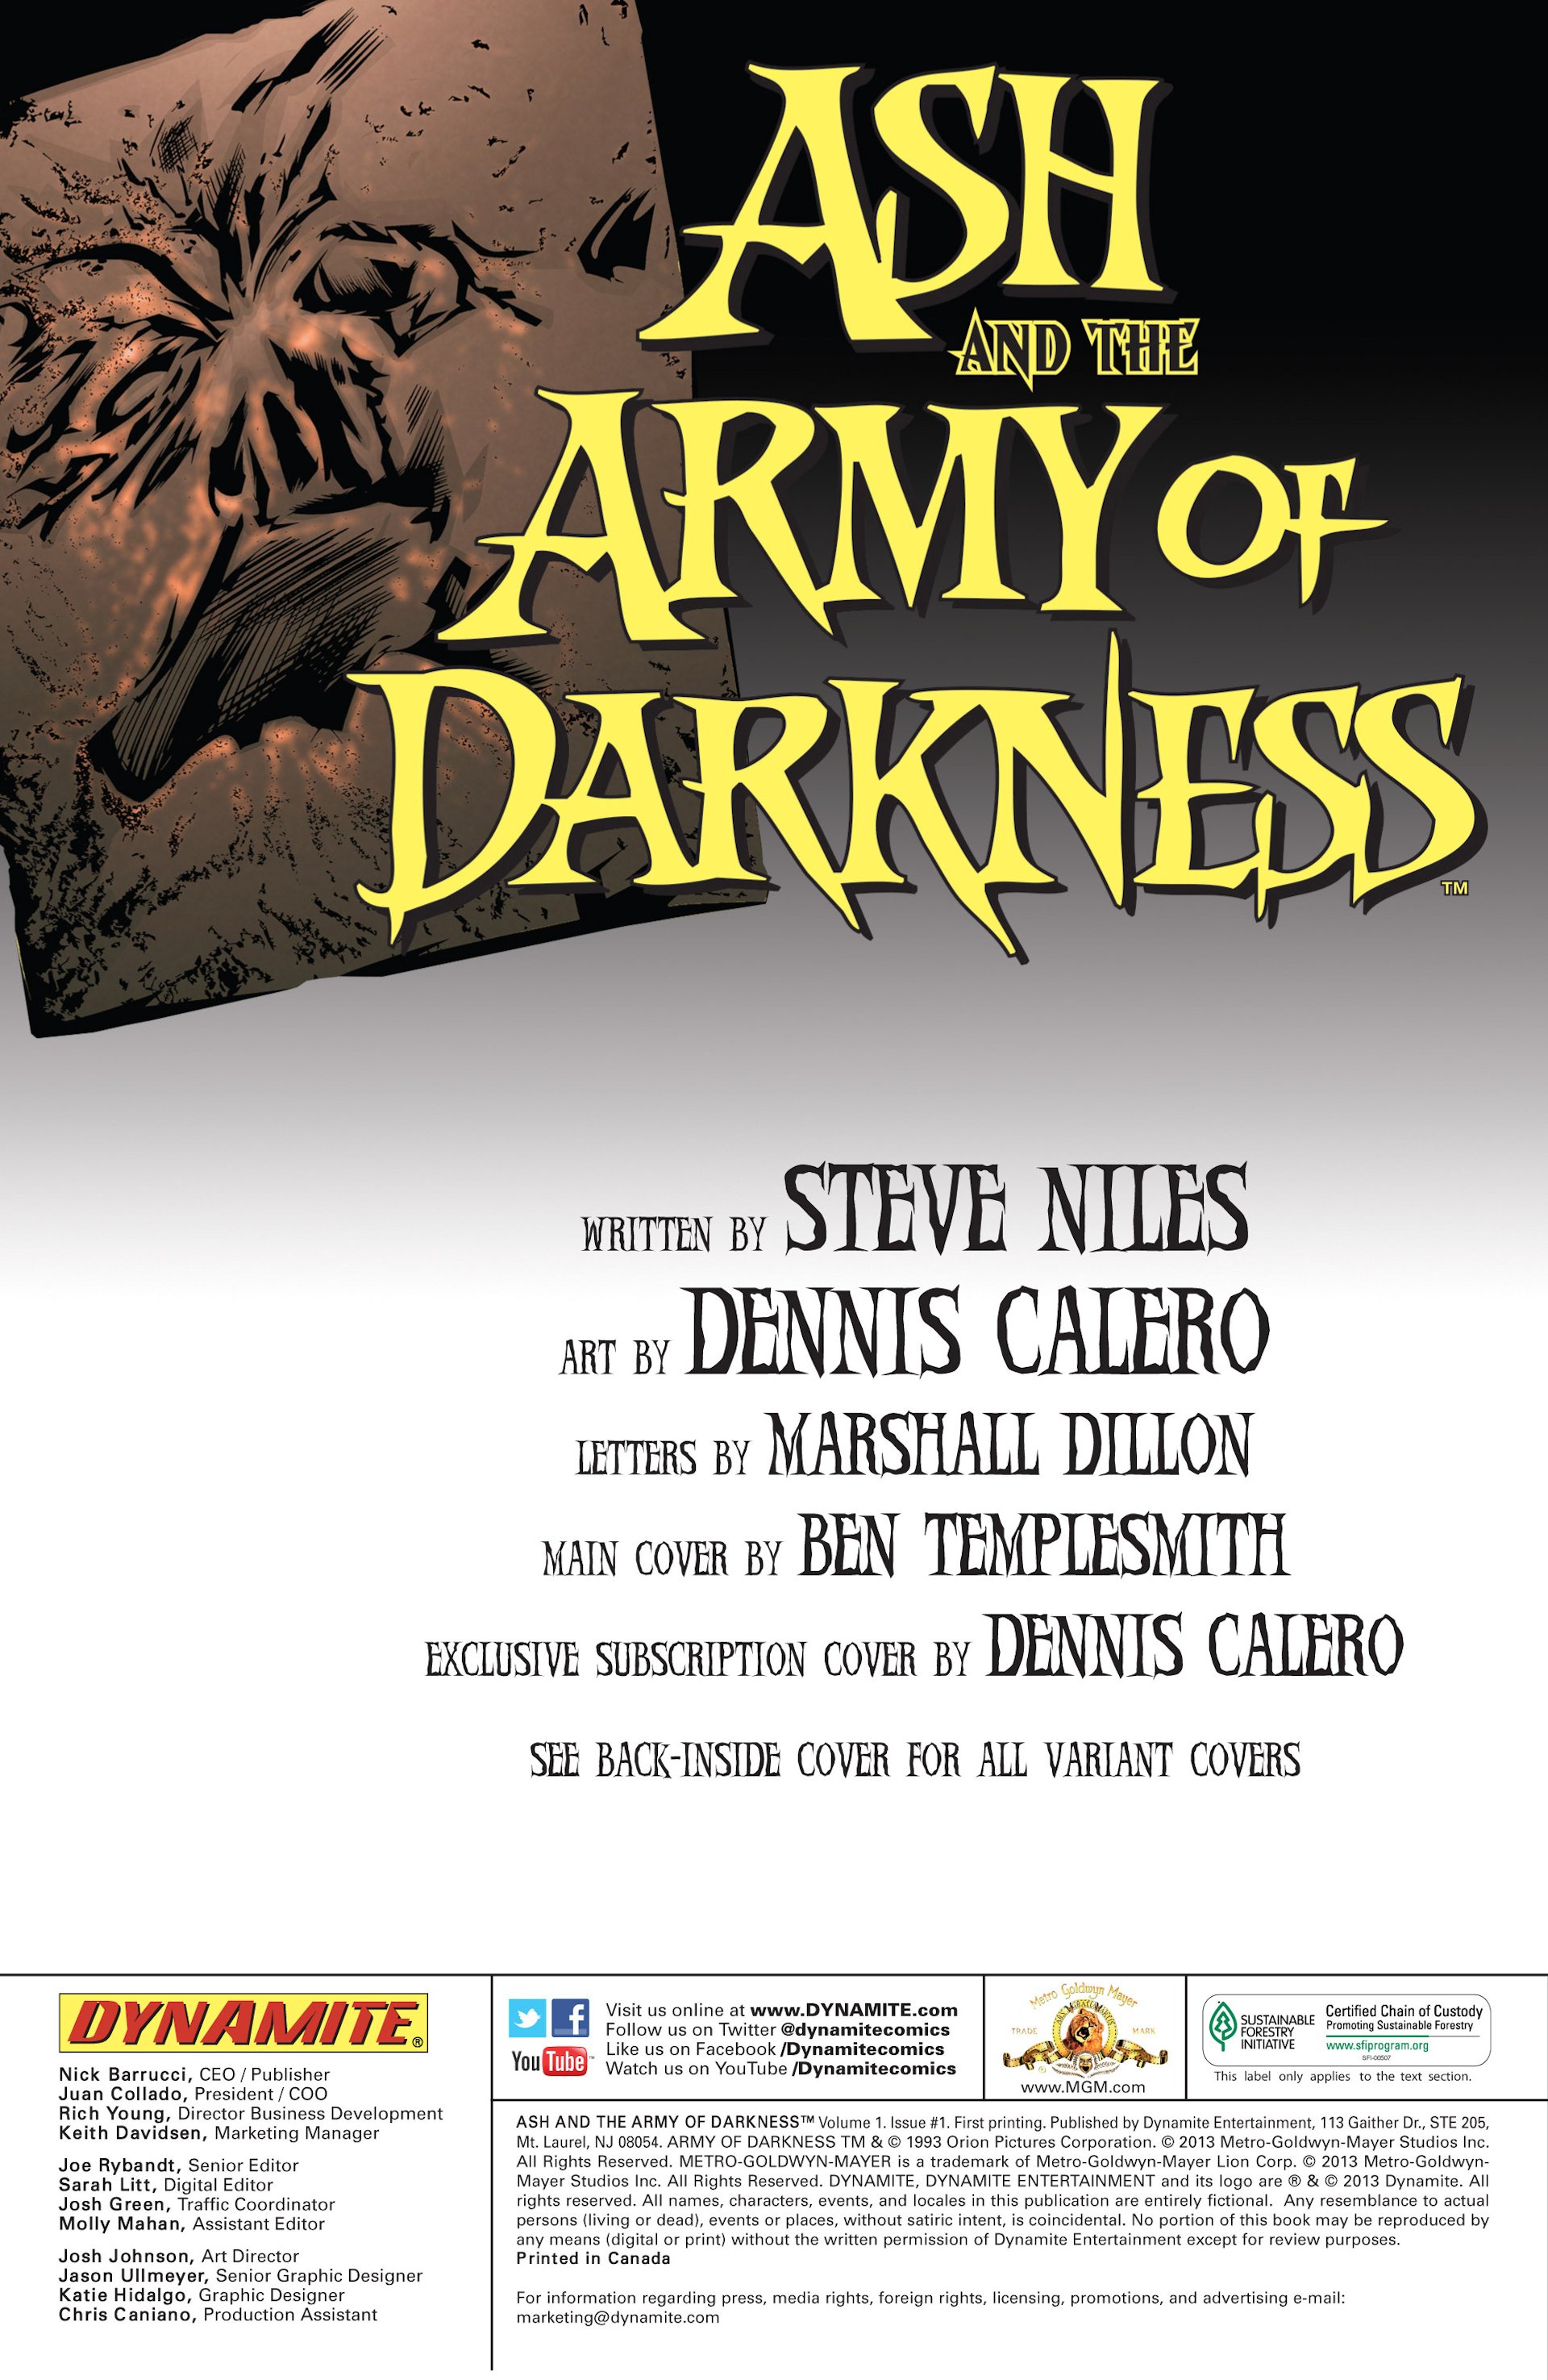 Read online Ash and the Army of Darkness comic -  Issue #1 - 2